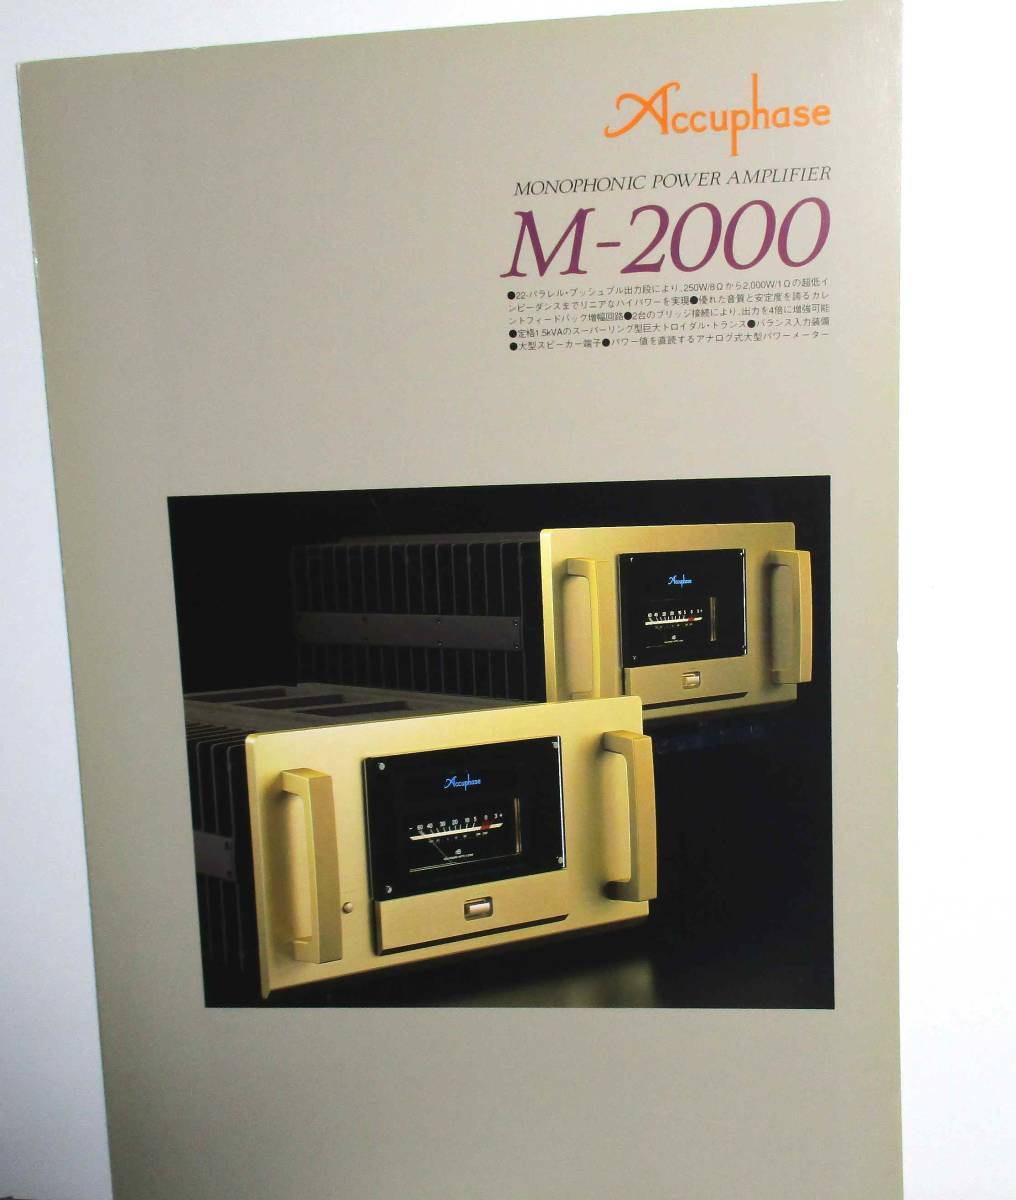 ★★★　Accuphase / アキュフェーズ M-2000　＜単品カタログ＞1997年版_画像1